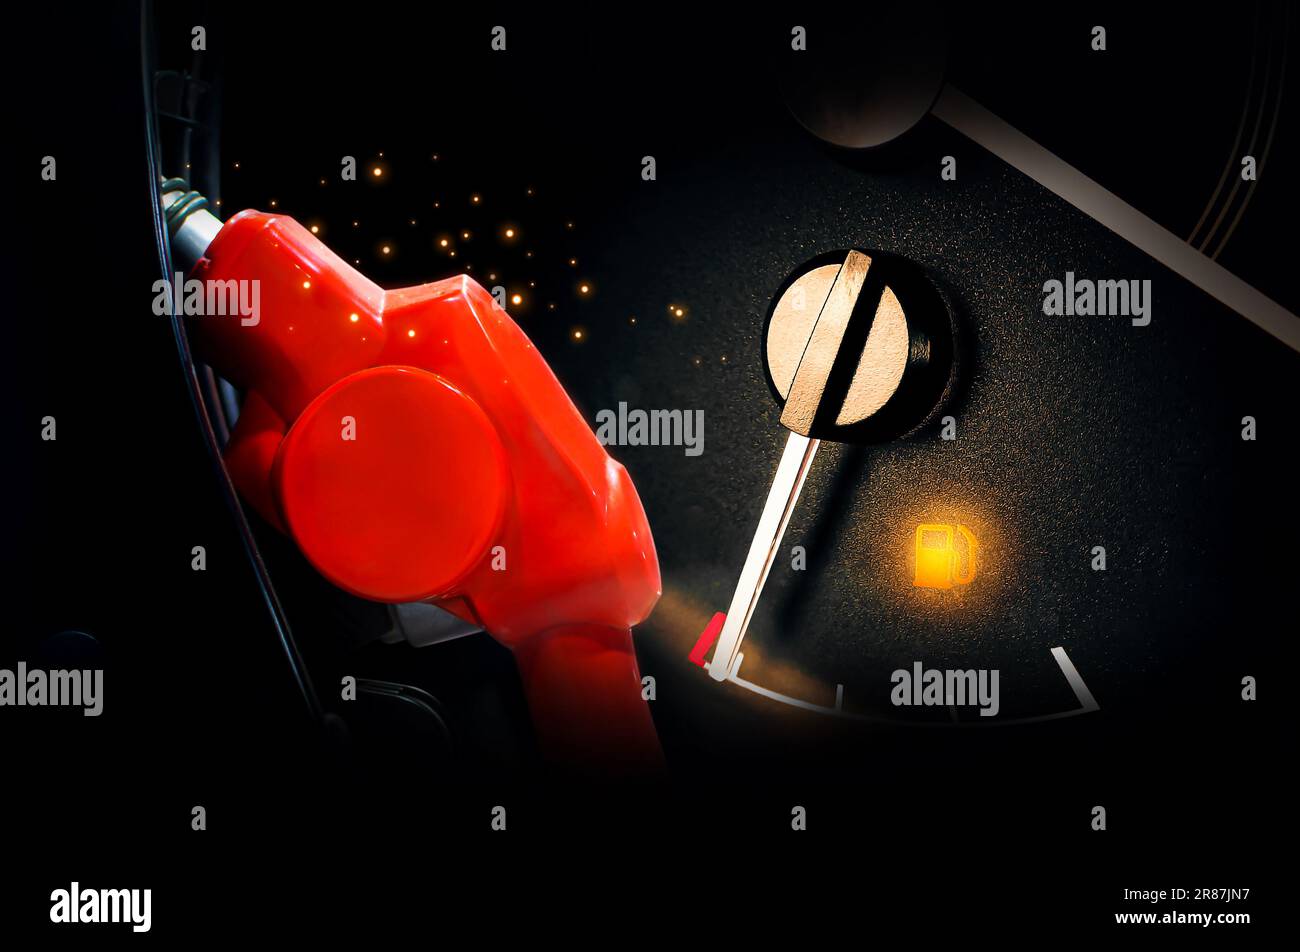 Low fuel indicator, fuel nozzle and gauge on dark background. Stock Photo